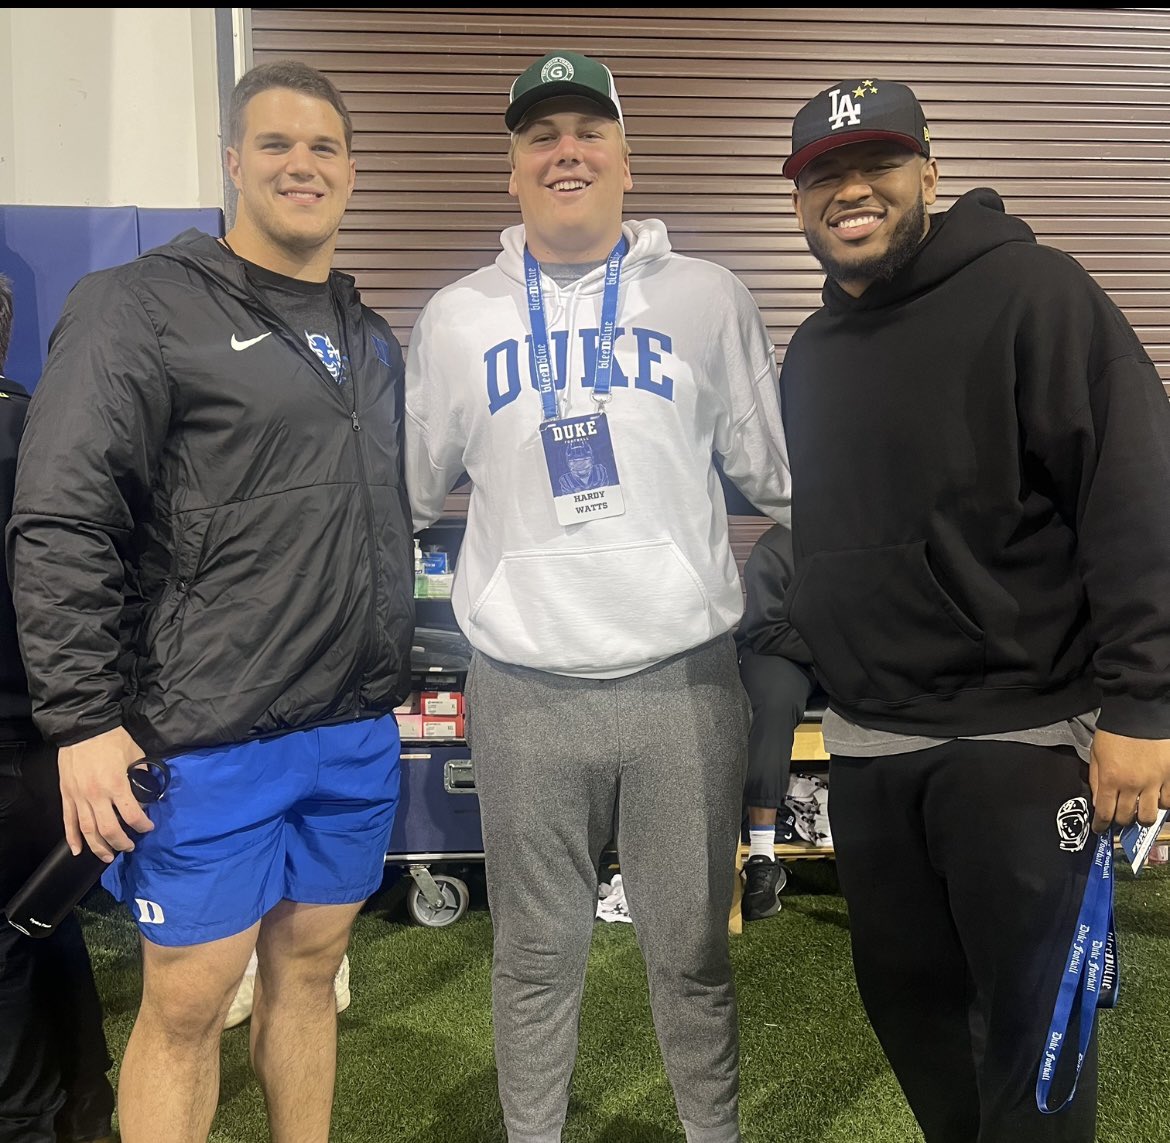 My family and I had an amazing time at @DukeFOOTBALL today. Thank you to @JeffNorrid1, @Coach_MannyDiaz, and the entire Duke football staff. We had a great time! @CoachCDay @coachdinofb @DXSF_FB @coachRickLyster @ChadSimmons_ @BrianDohn247 @RivalsFriedman